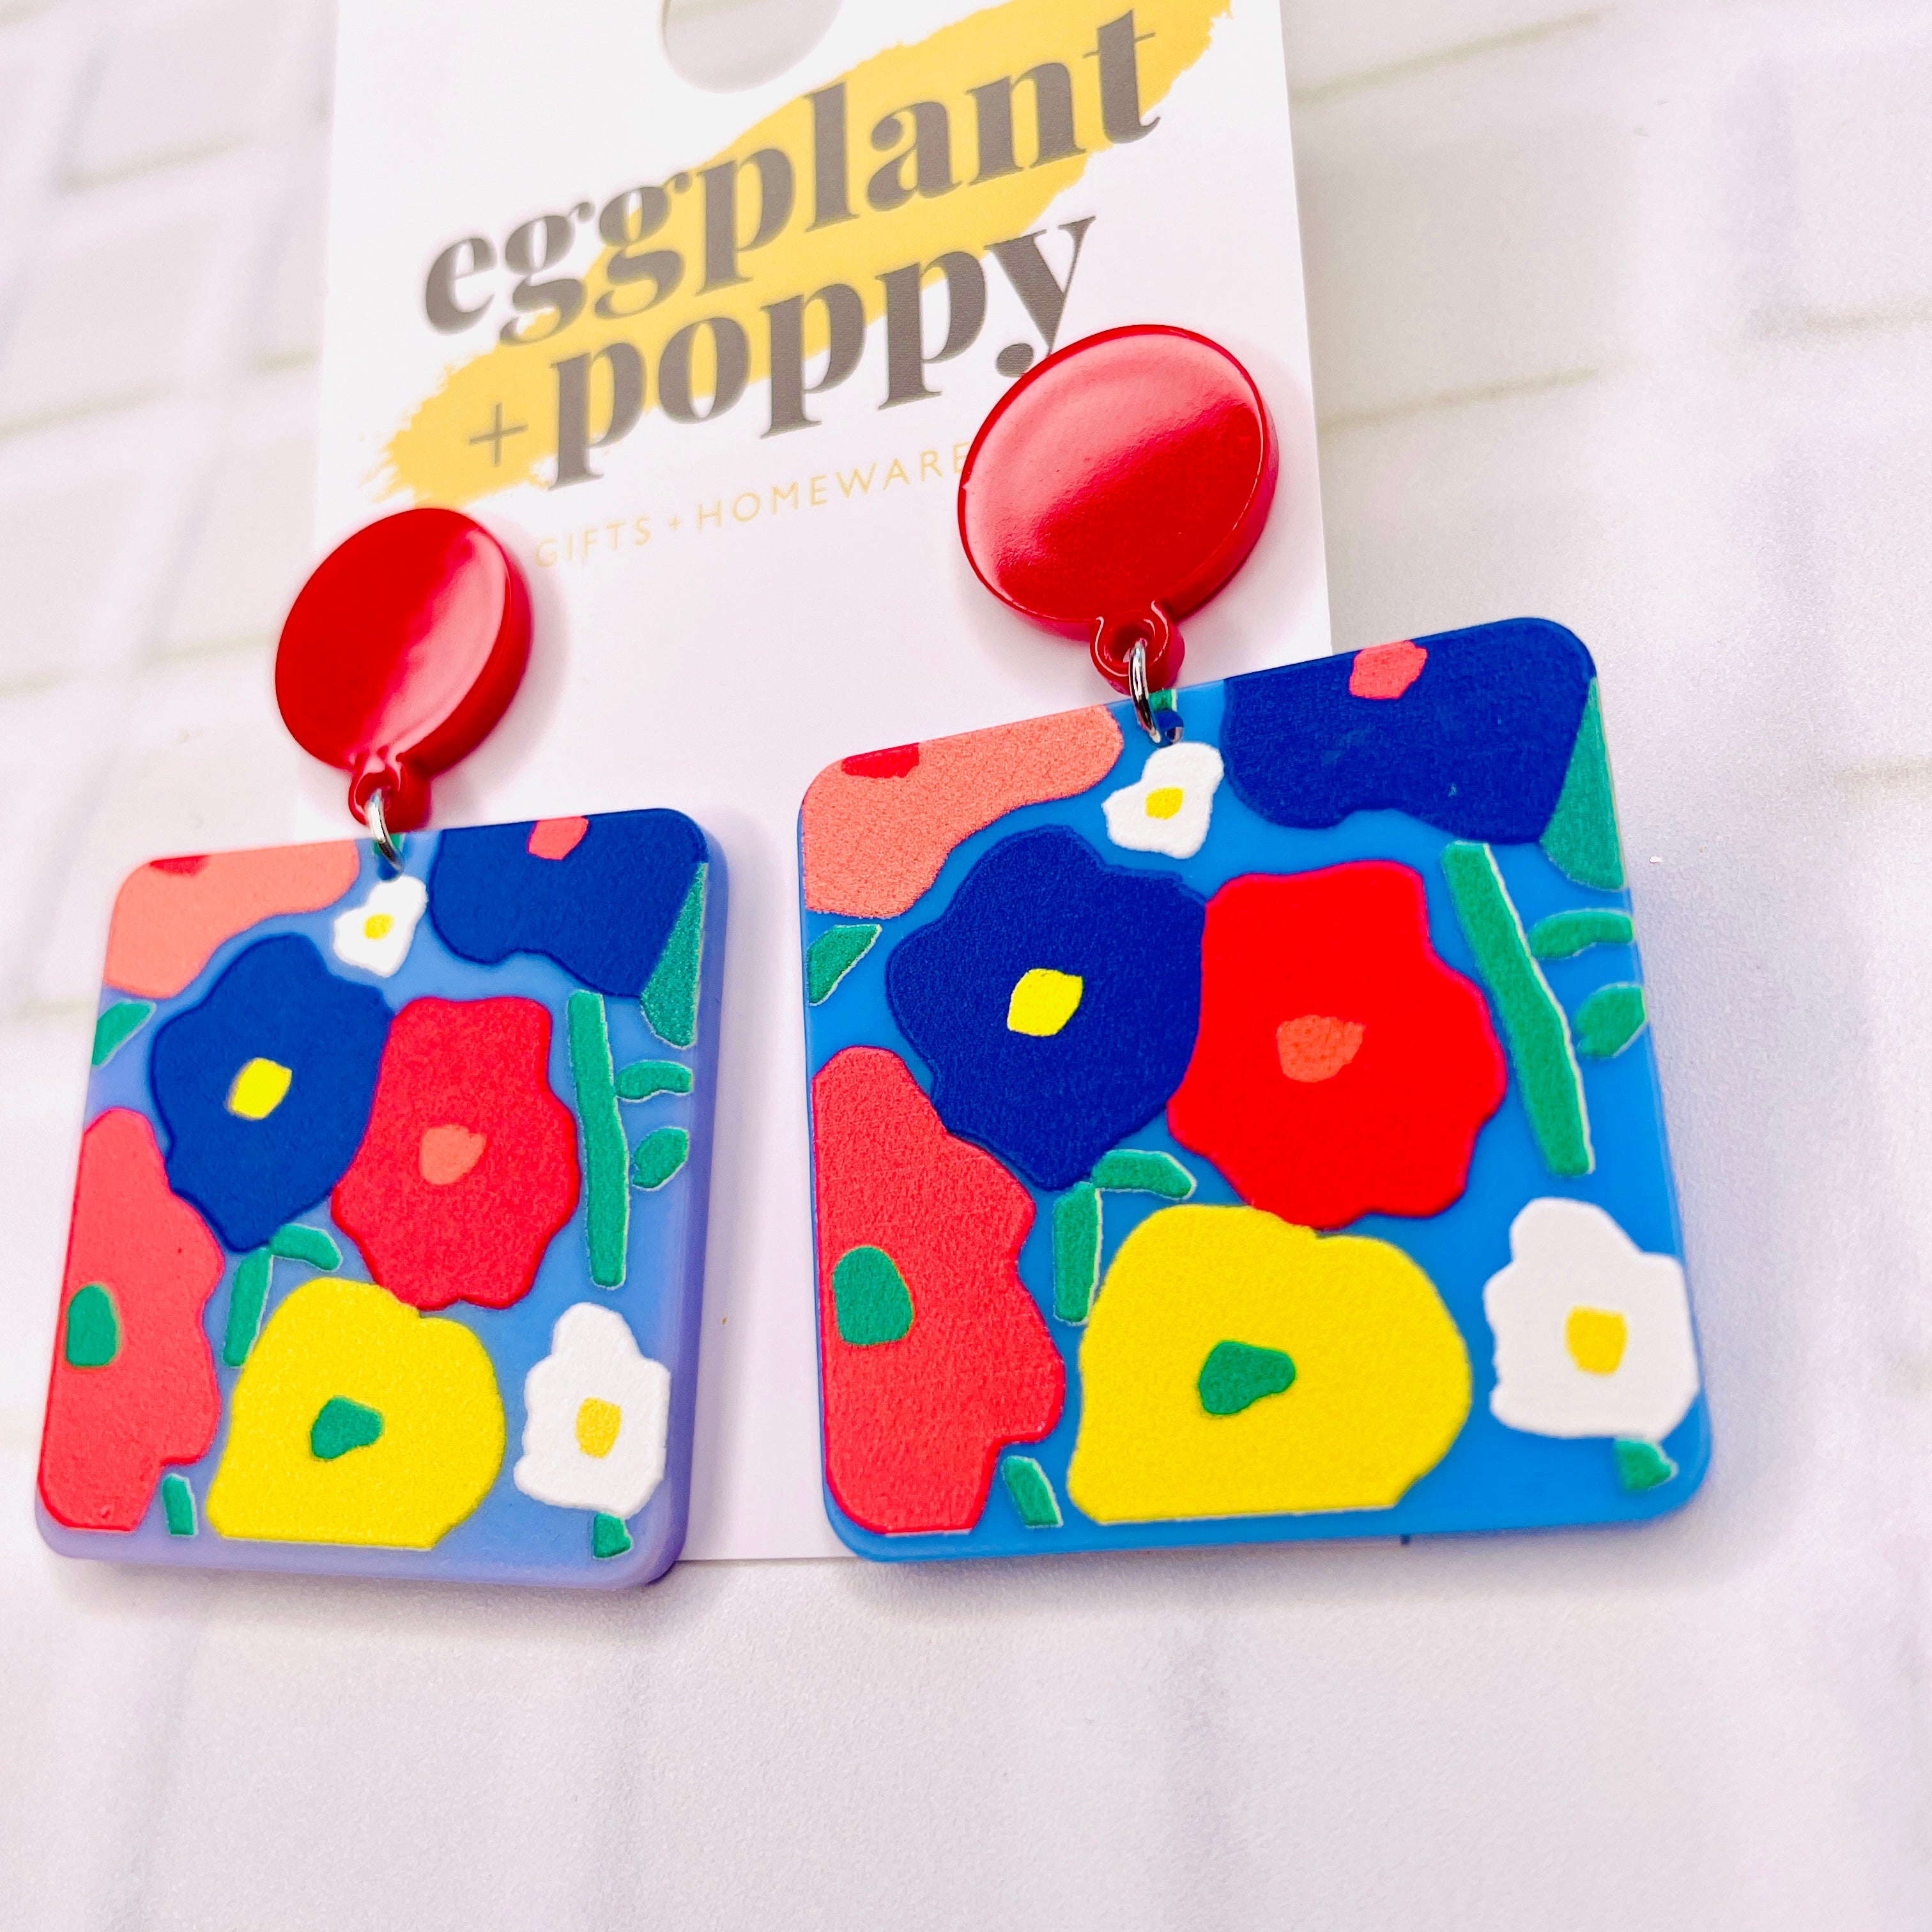 Floral Square Earrings